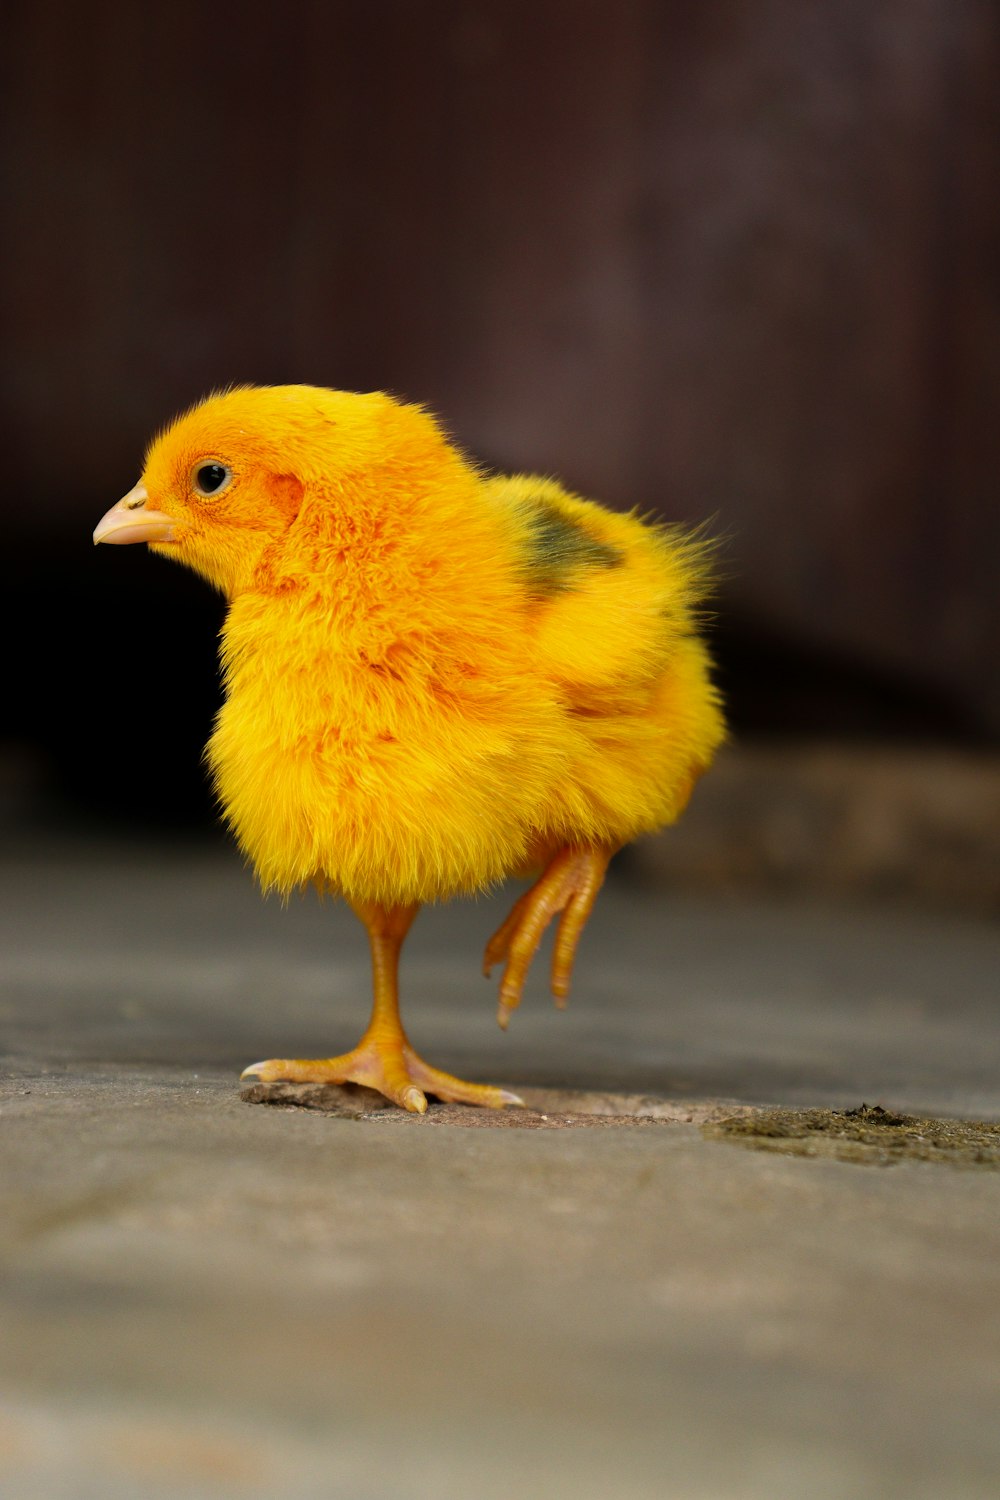 a small yellow chicken standing on a concrete floor